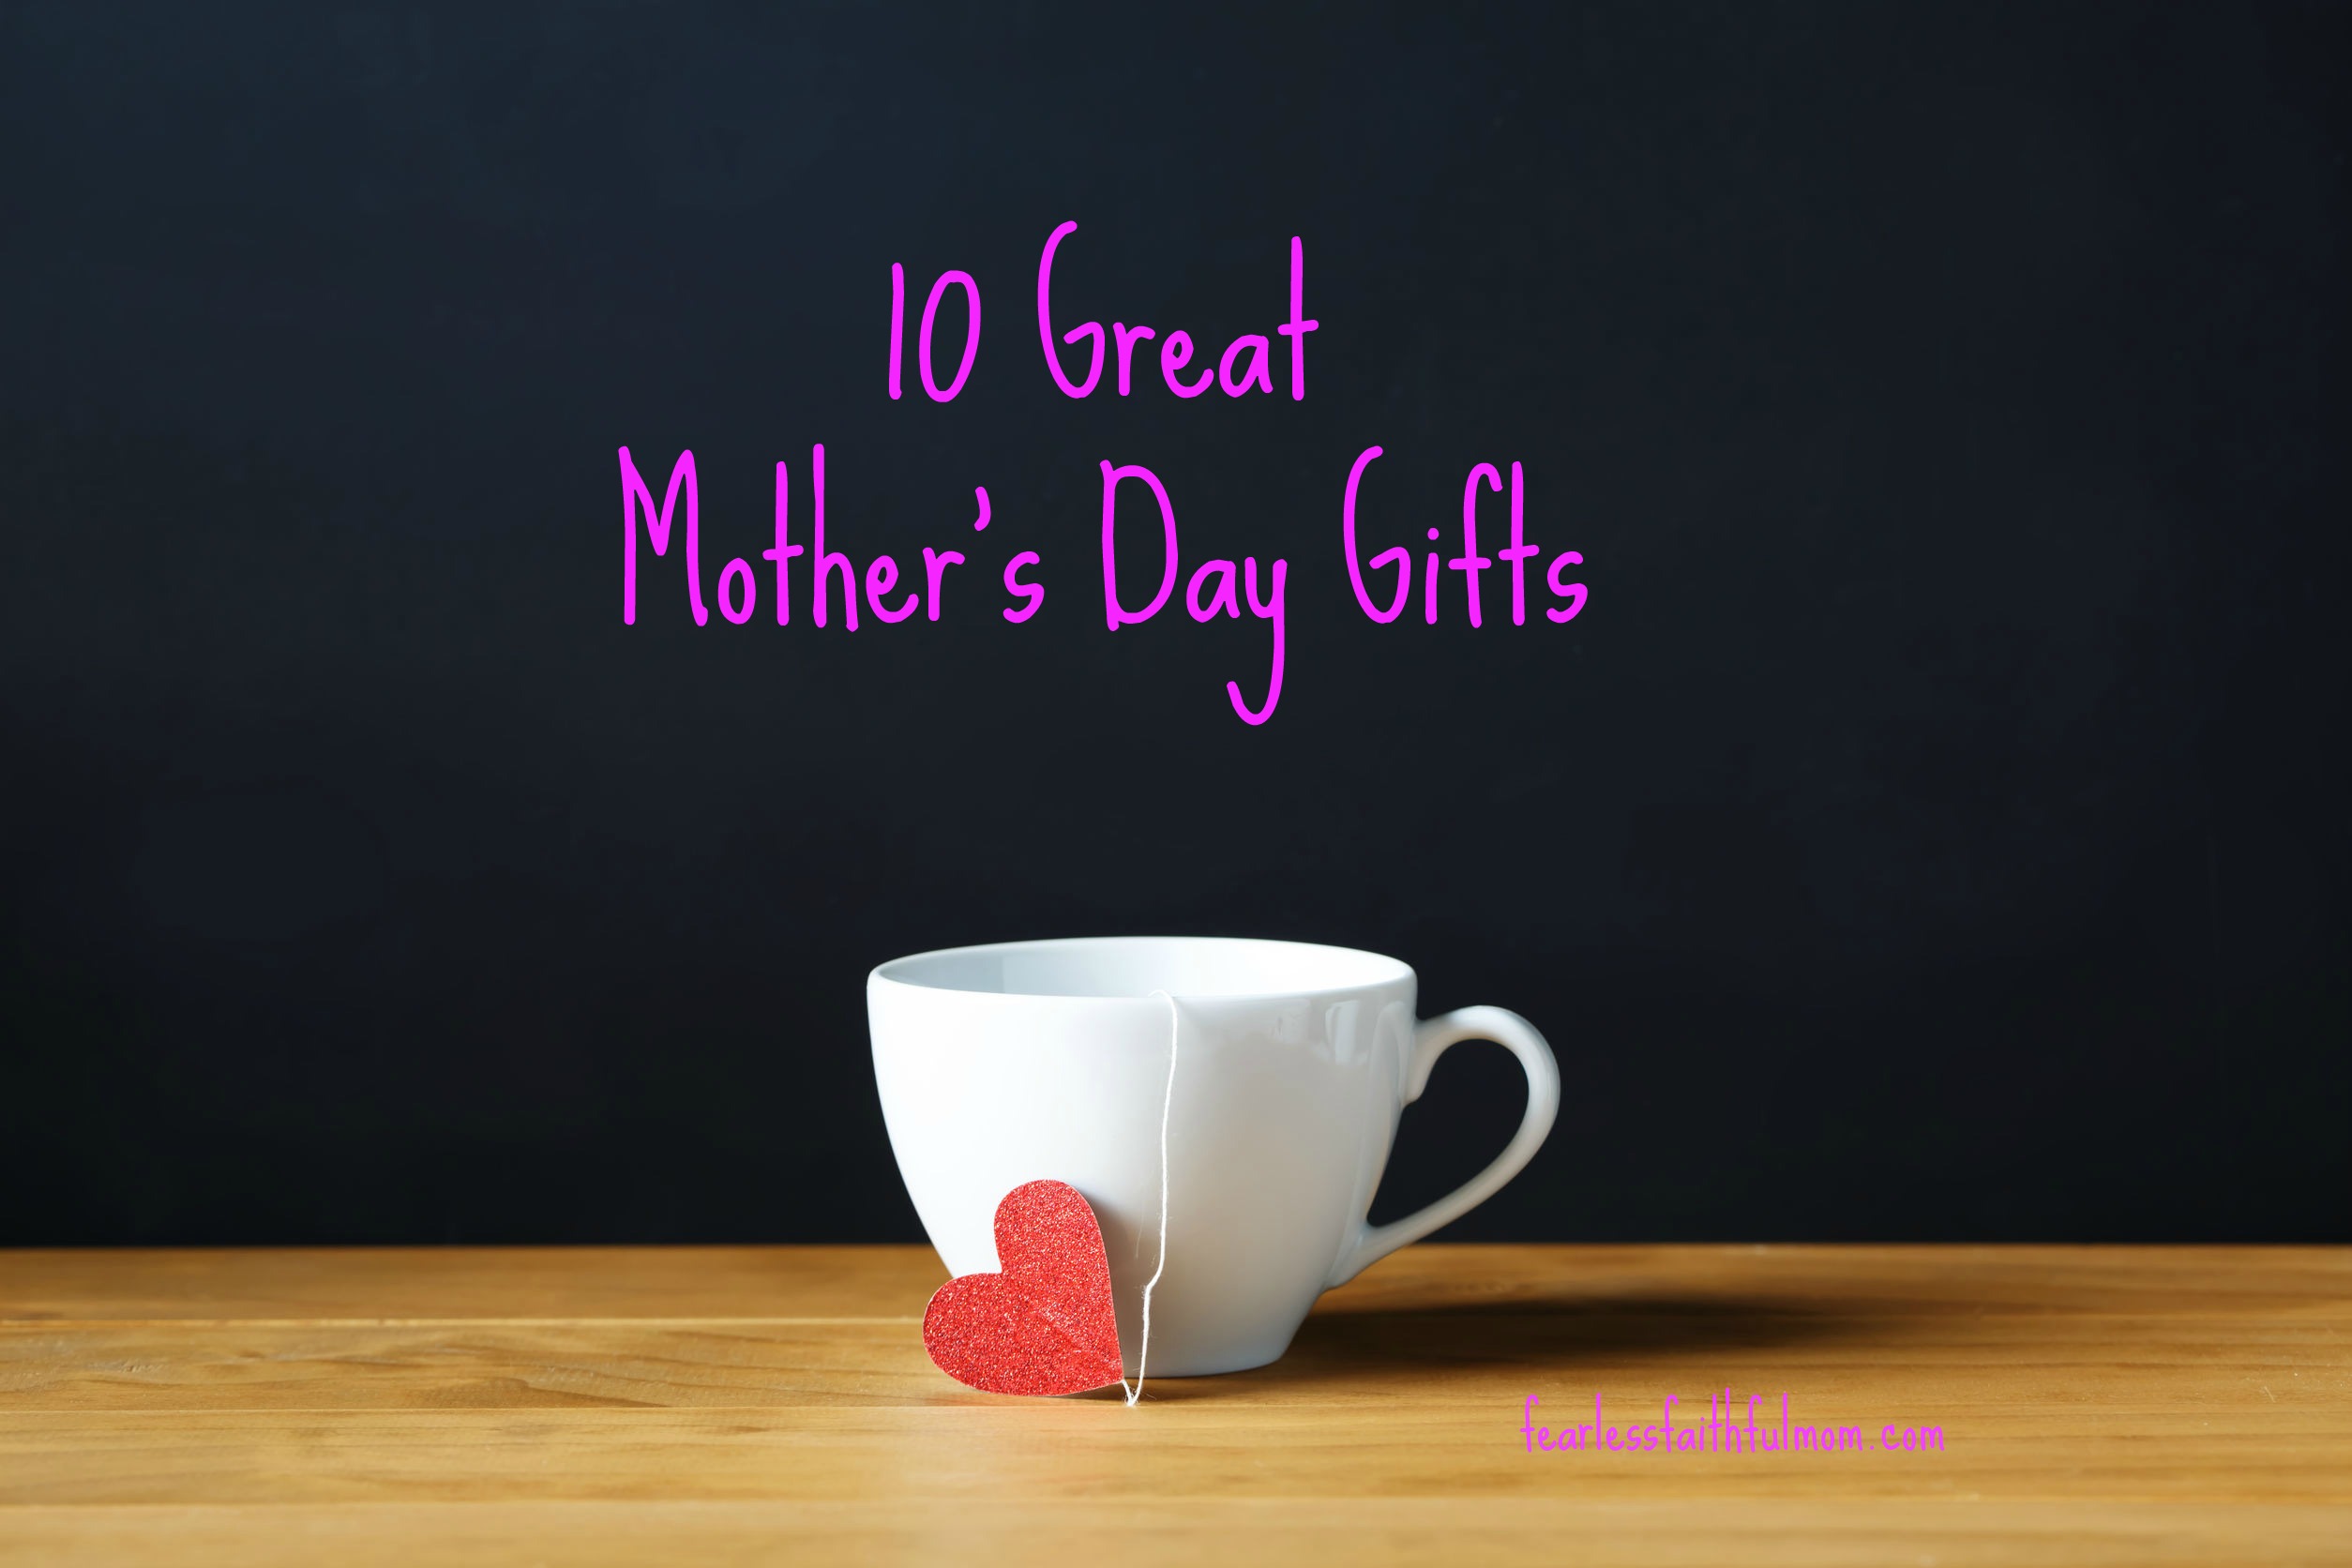 10 Great Mother's Day Gifts (or gifts for moms on every occasion) from fearlessfaithfulmom.com